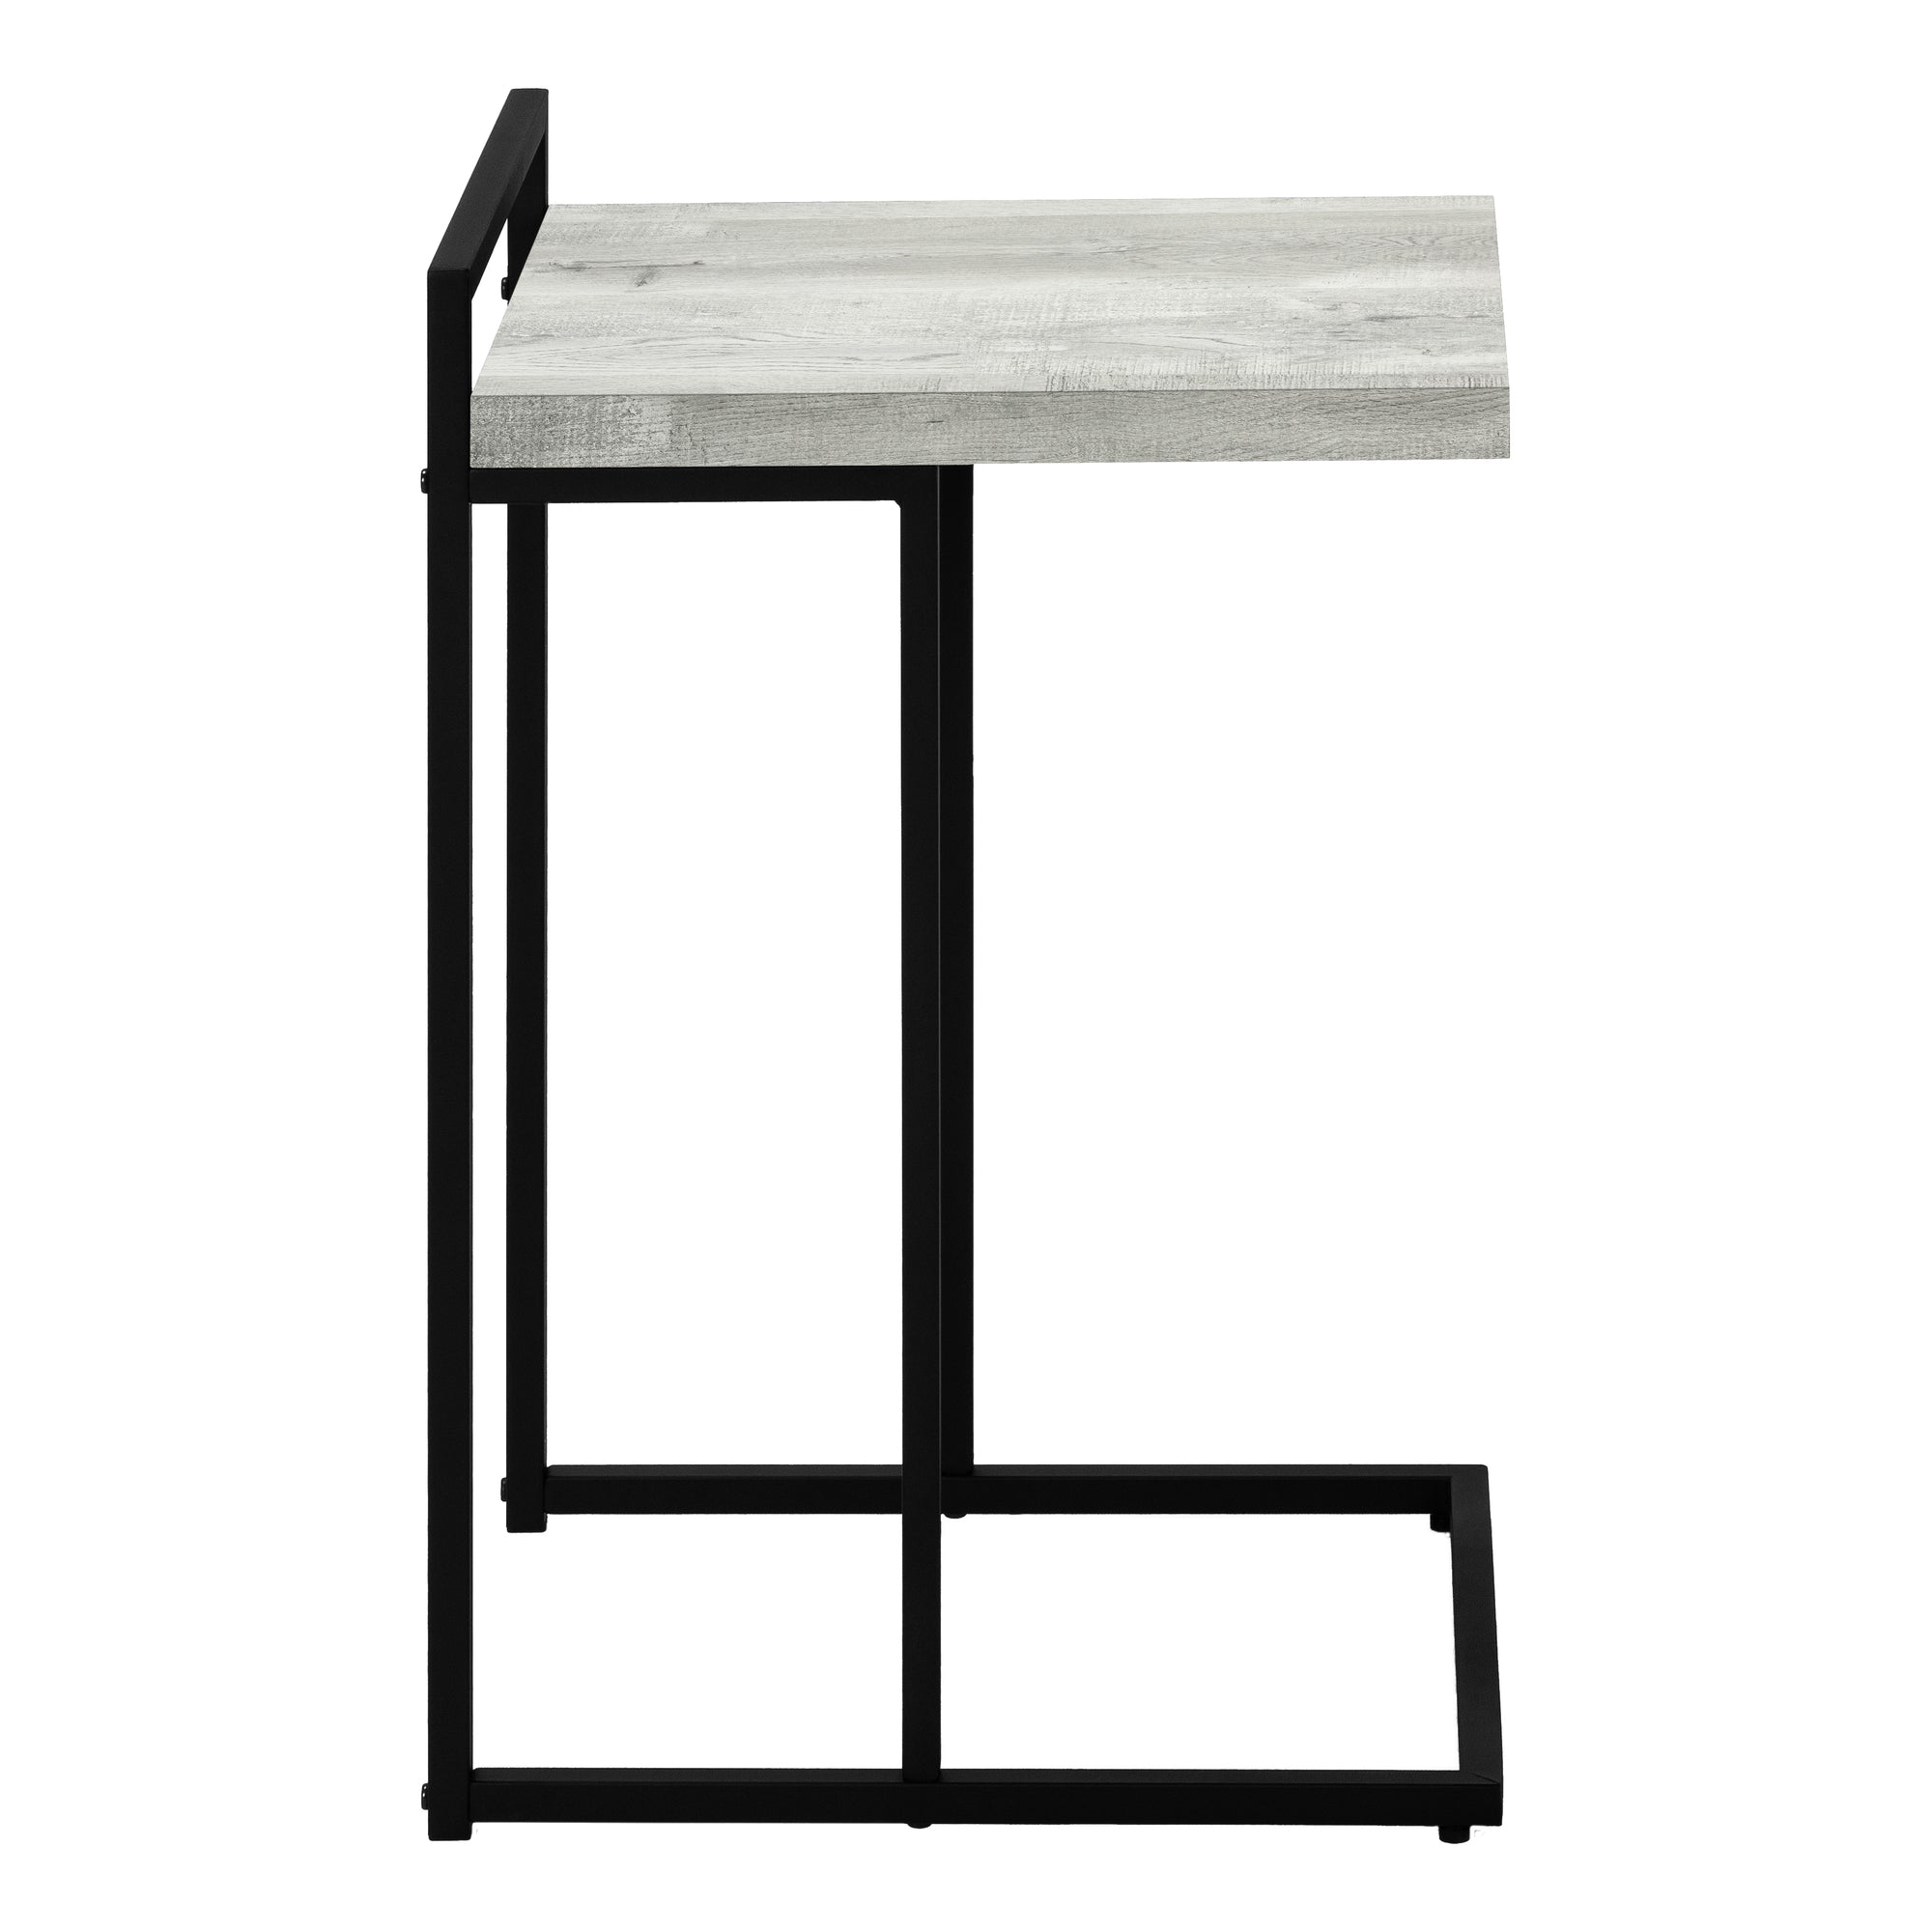 MN-803631    Accent Table, C-Shaped, End, Side, Snack, Living Room, Bedroom, Metal Frame, Laminate, Grey Reclaimed Wood Look, Black, Contemporary, Industrial, Modern